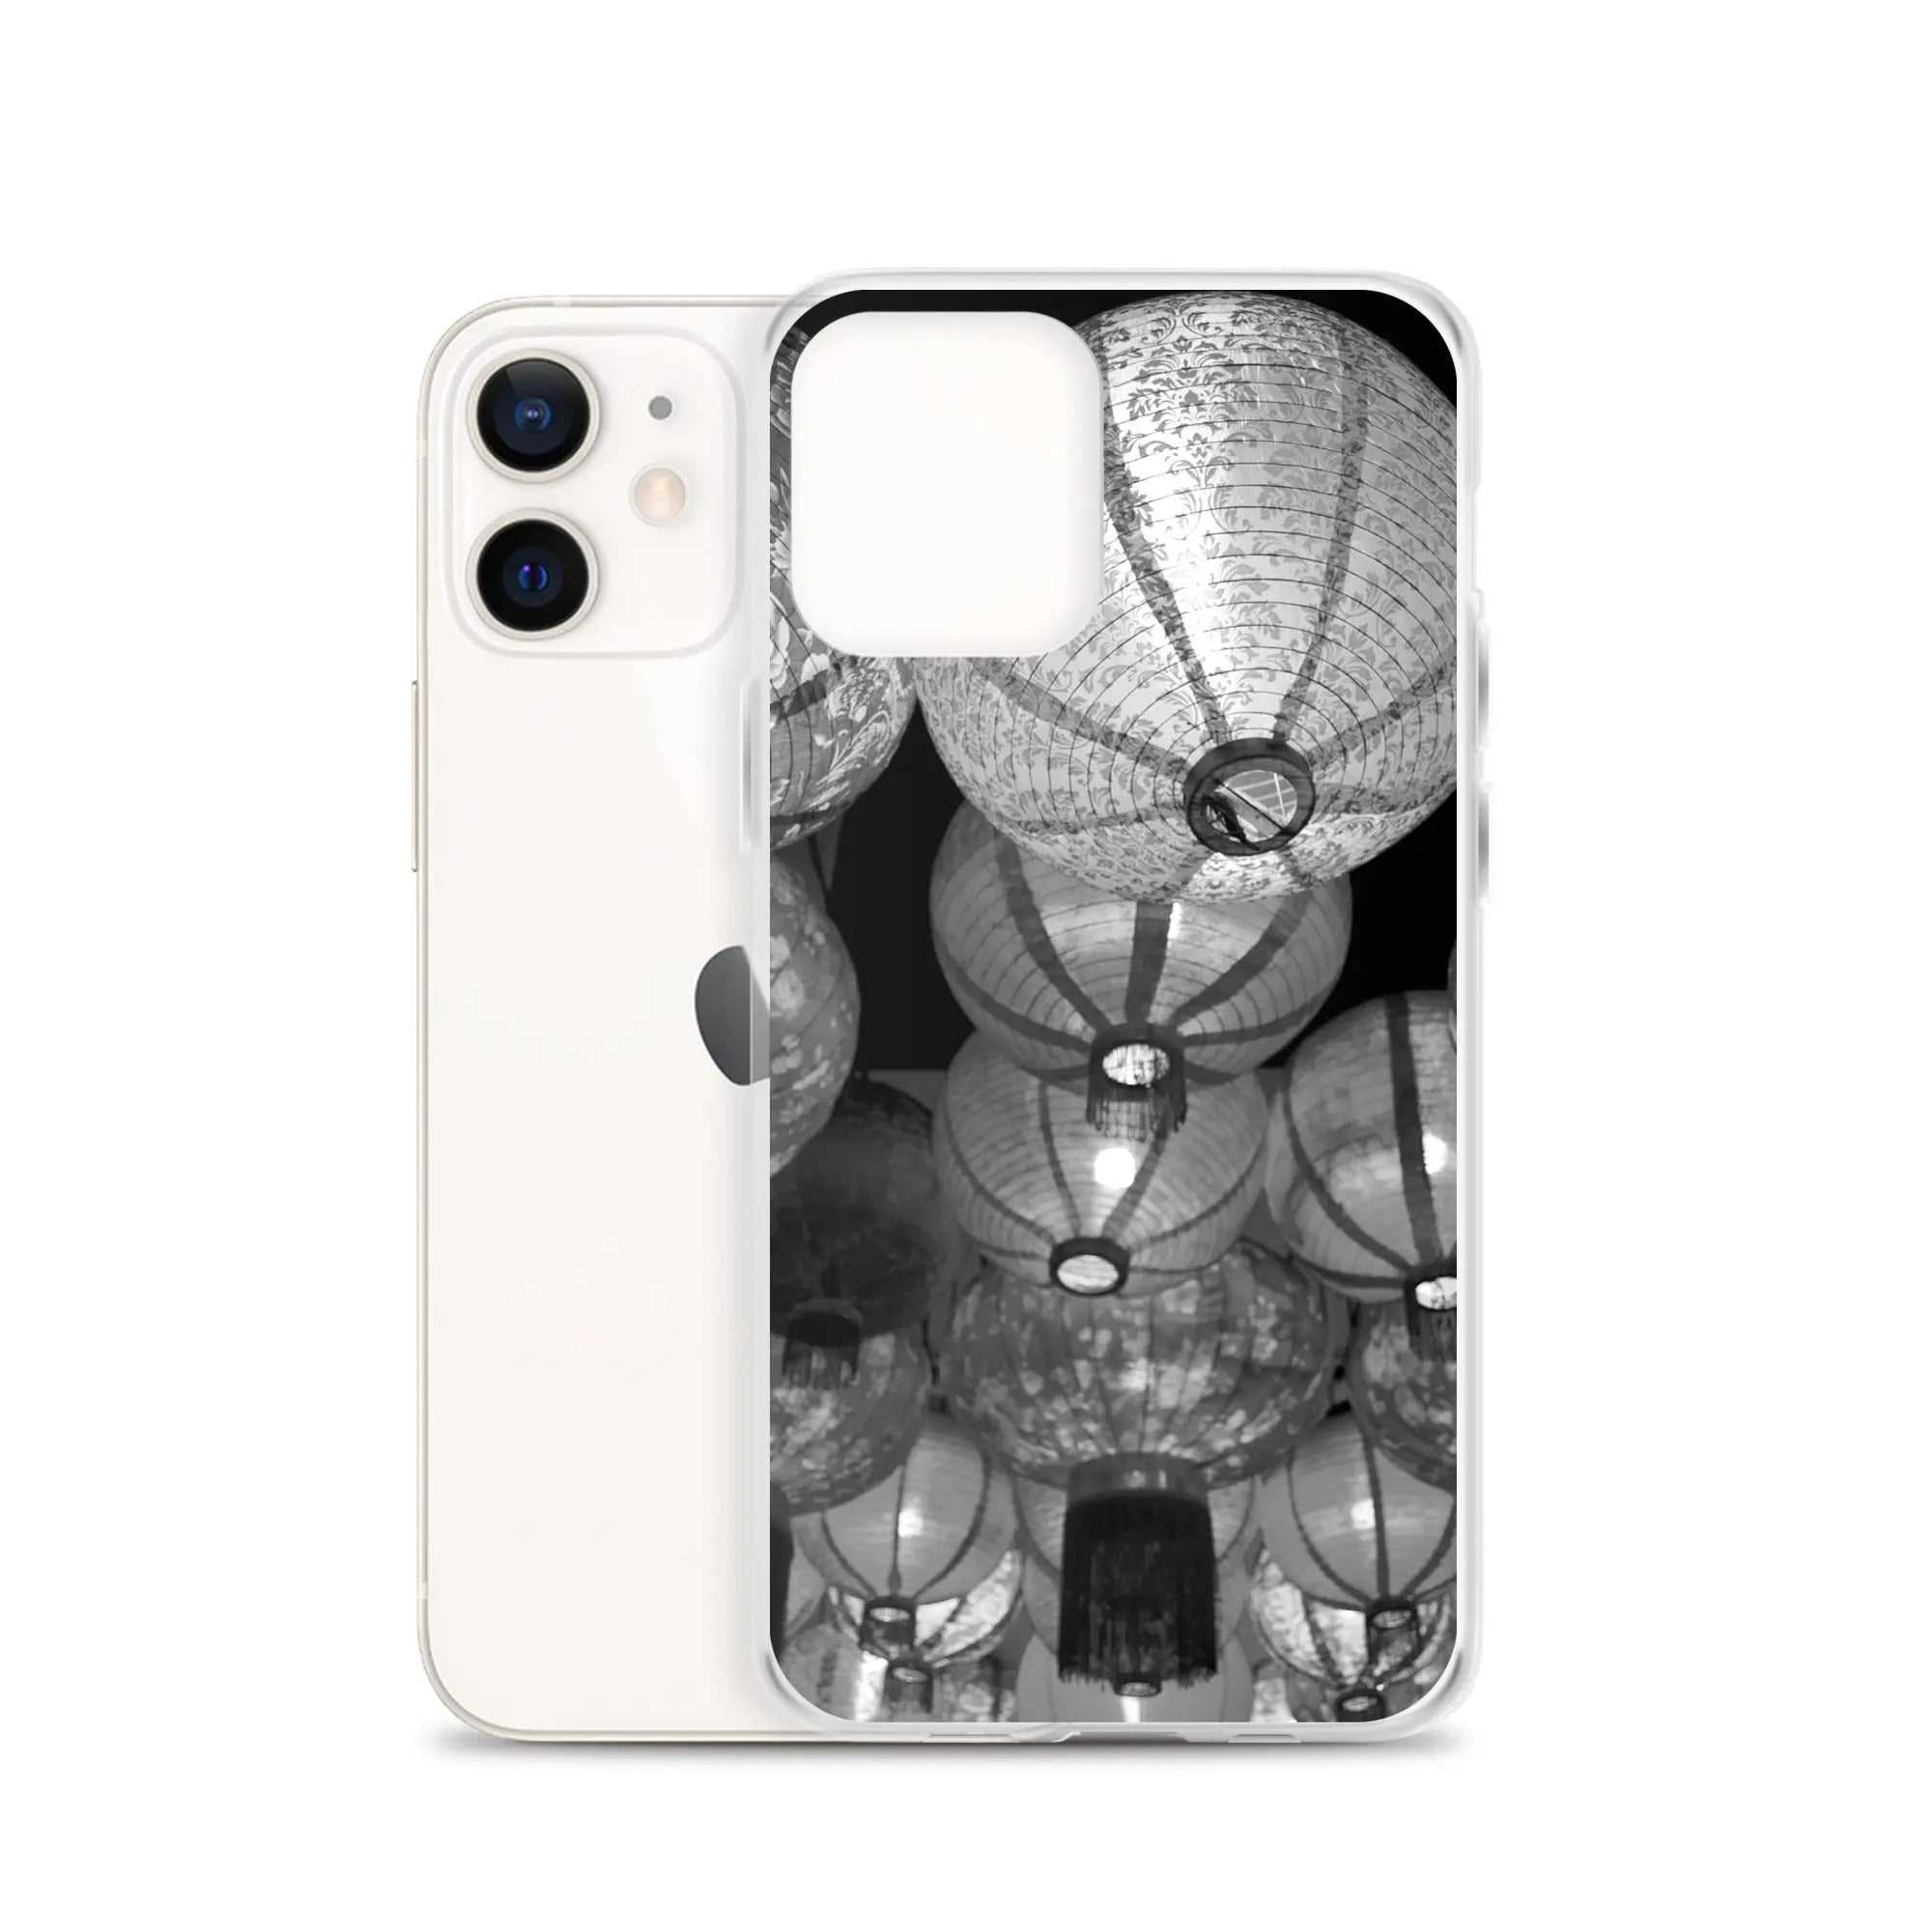 Raise The Red Lanterns - Designer Travels Art Iphone Case - Black And White - Iphone 12 - Mobile Phone Cases